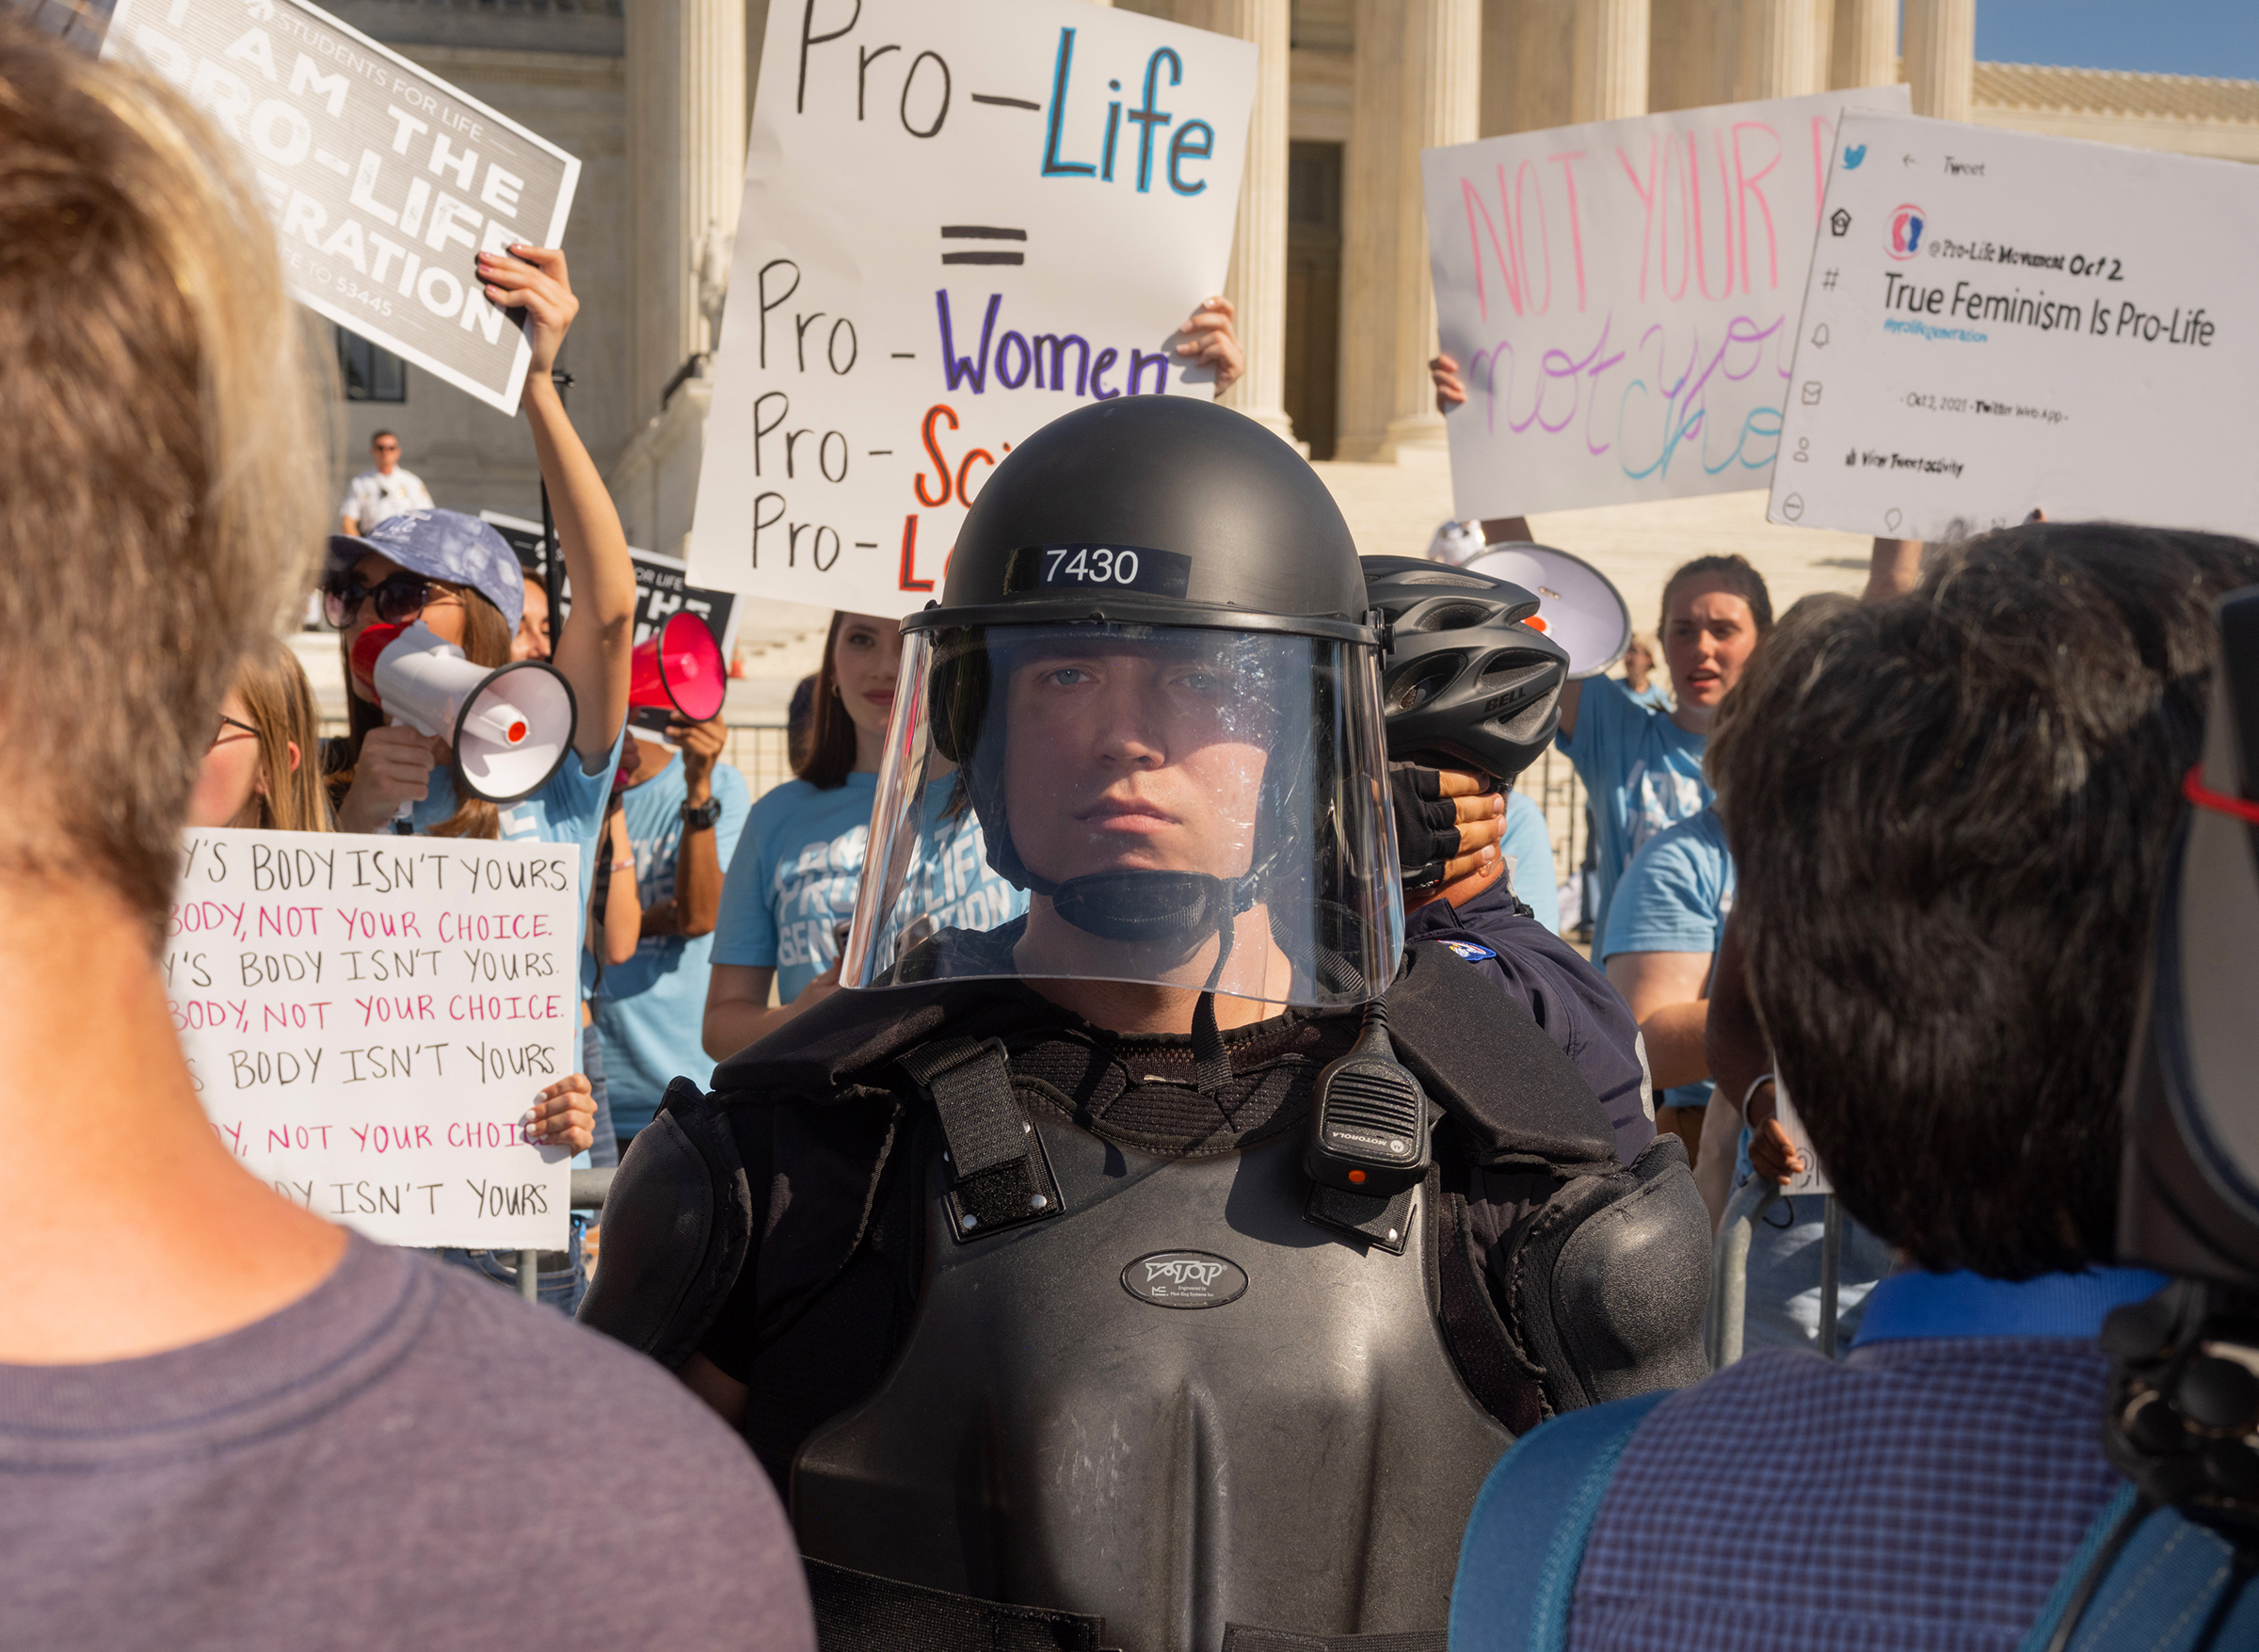 Protesters and counterprotesters meet outside of the Supreme Court at the Women's March and Rally for Abortion Justice in Washington, D.C., on Oct. 2. With counterprotesters situated closer to the building, a security officer stands in between the groups.